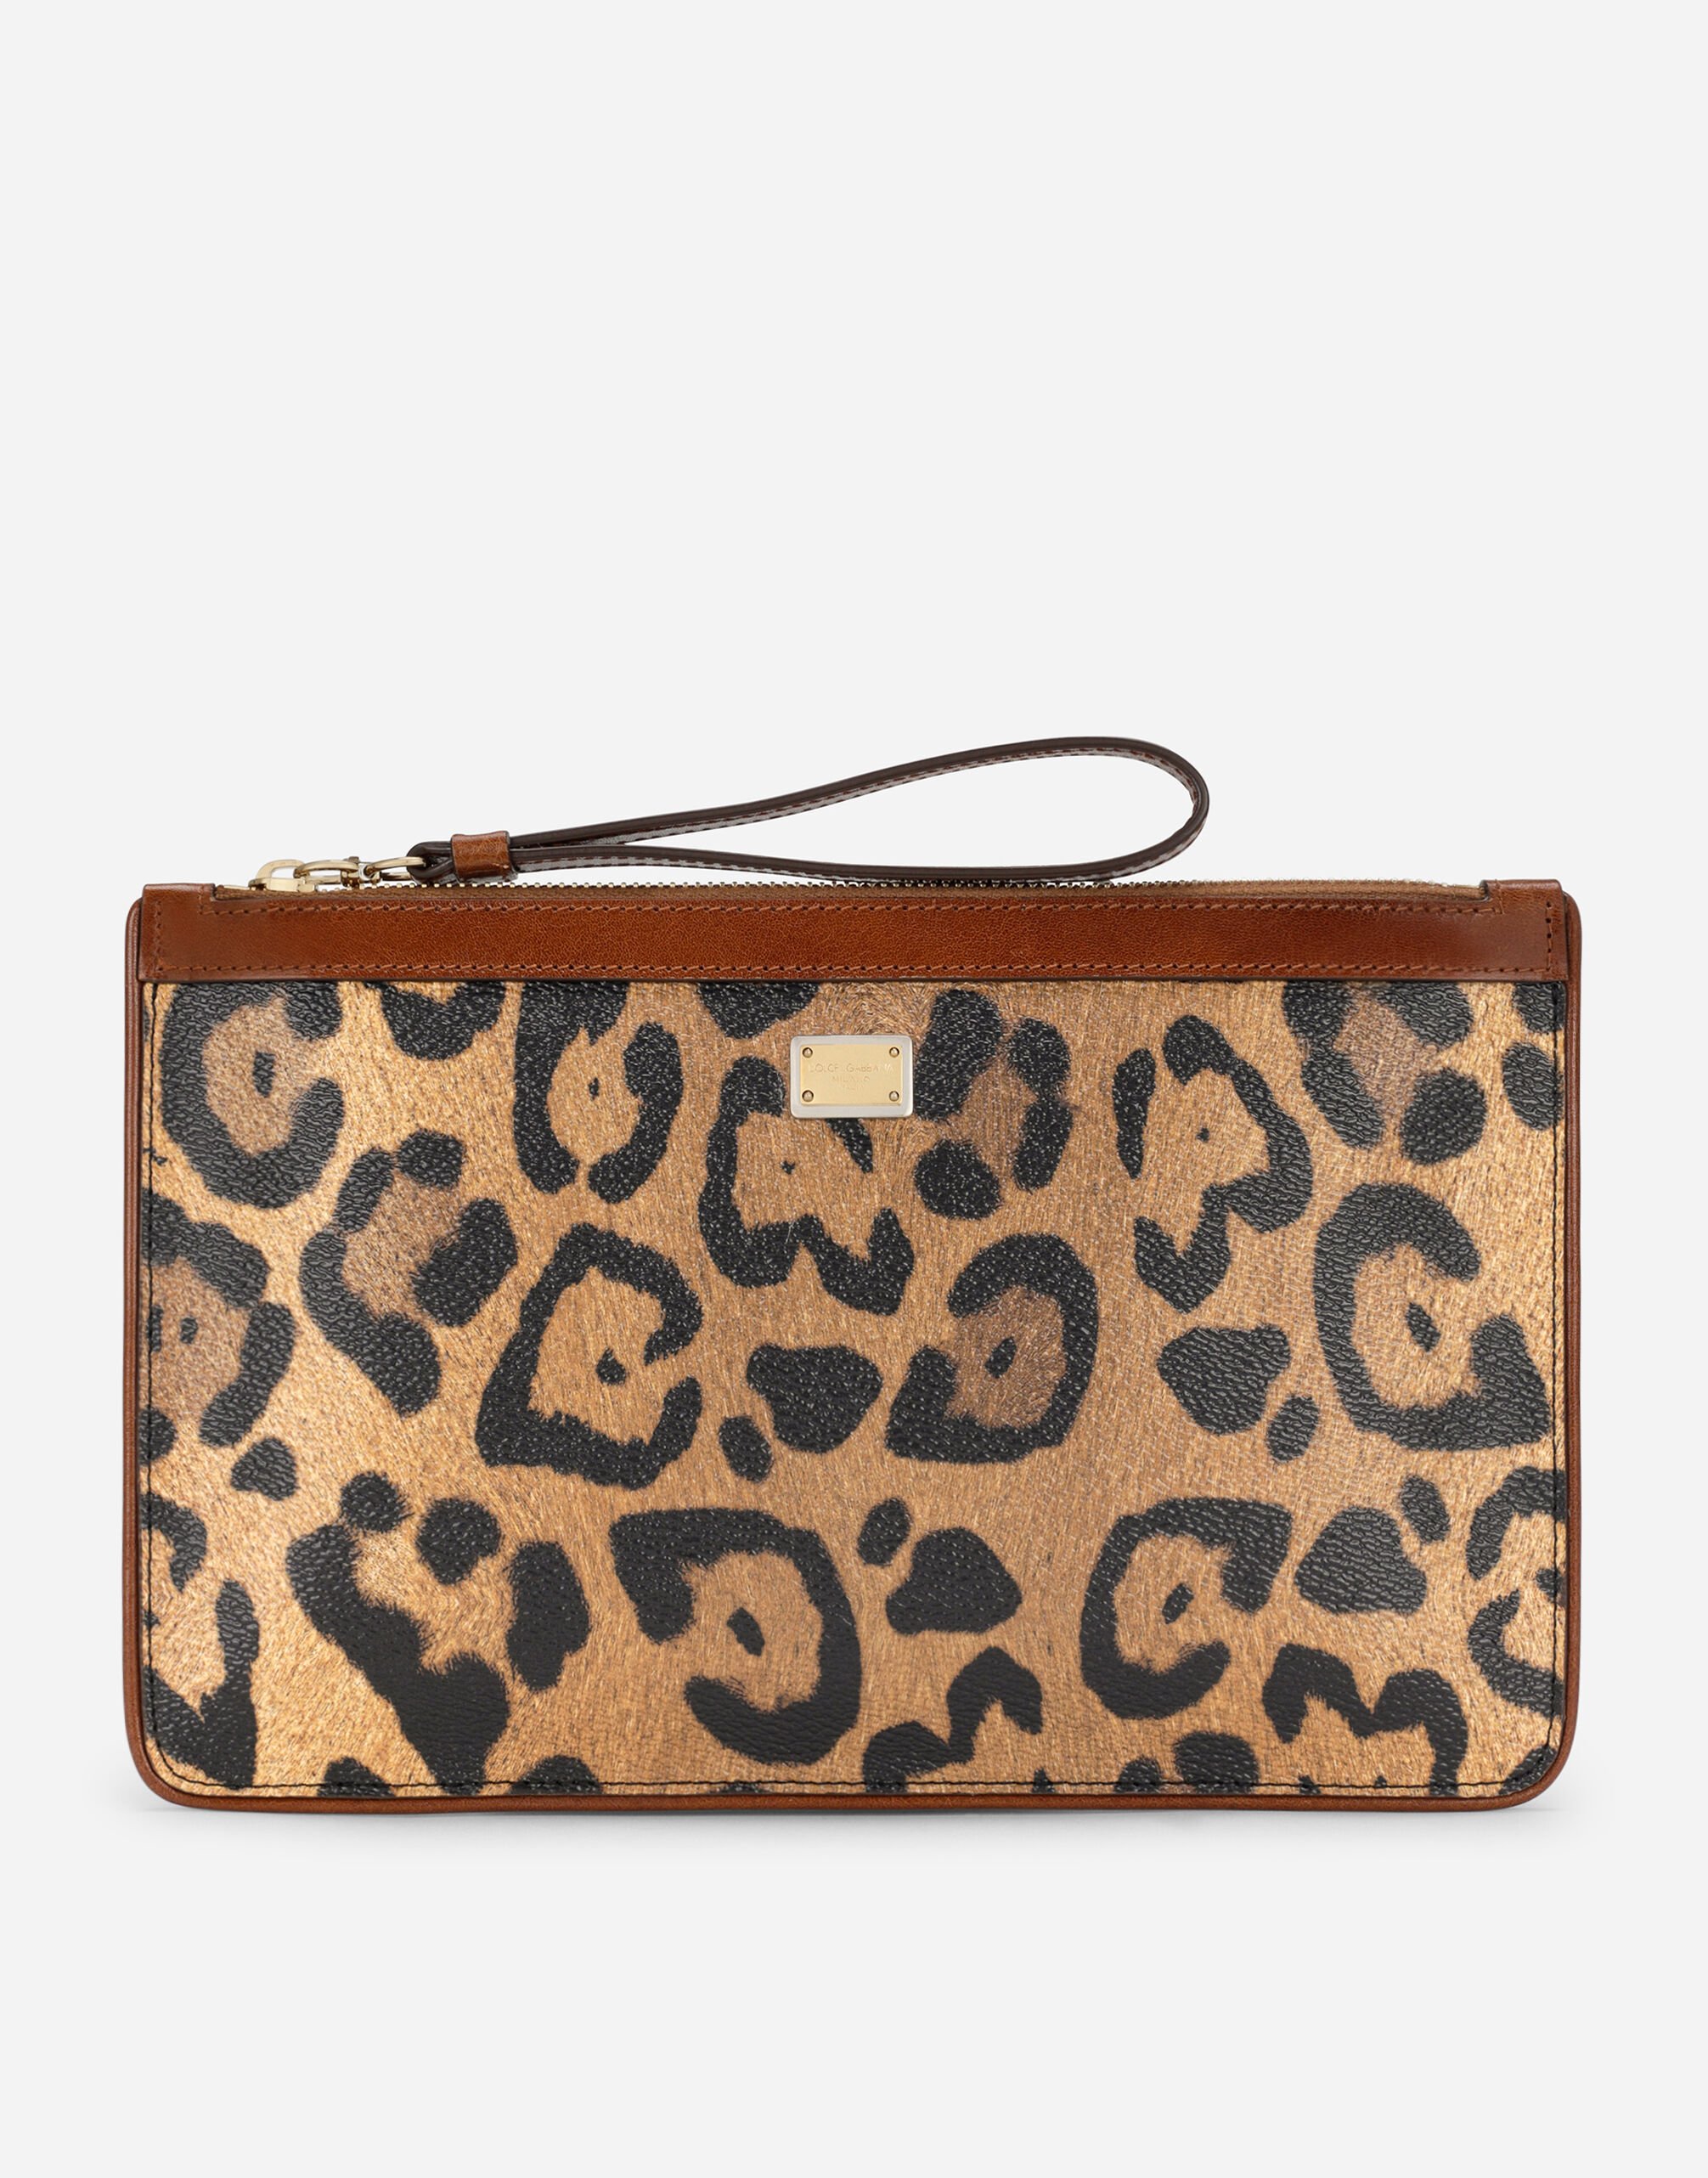 Dolce & Gabbana Flat toiletry bag in leopard-print Crespo with branded plate Black BI0770A1001